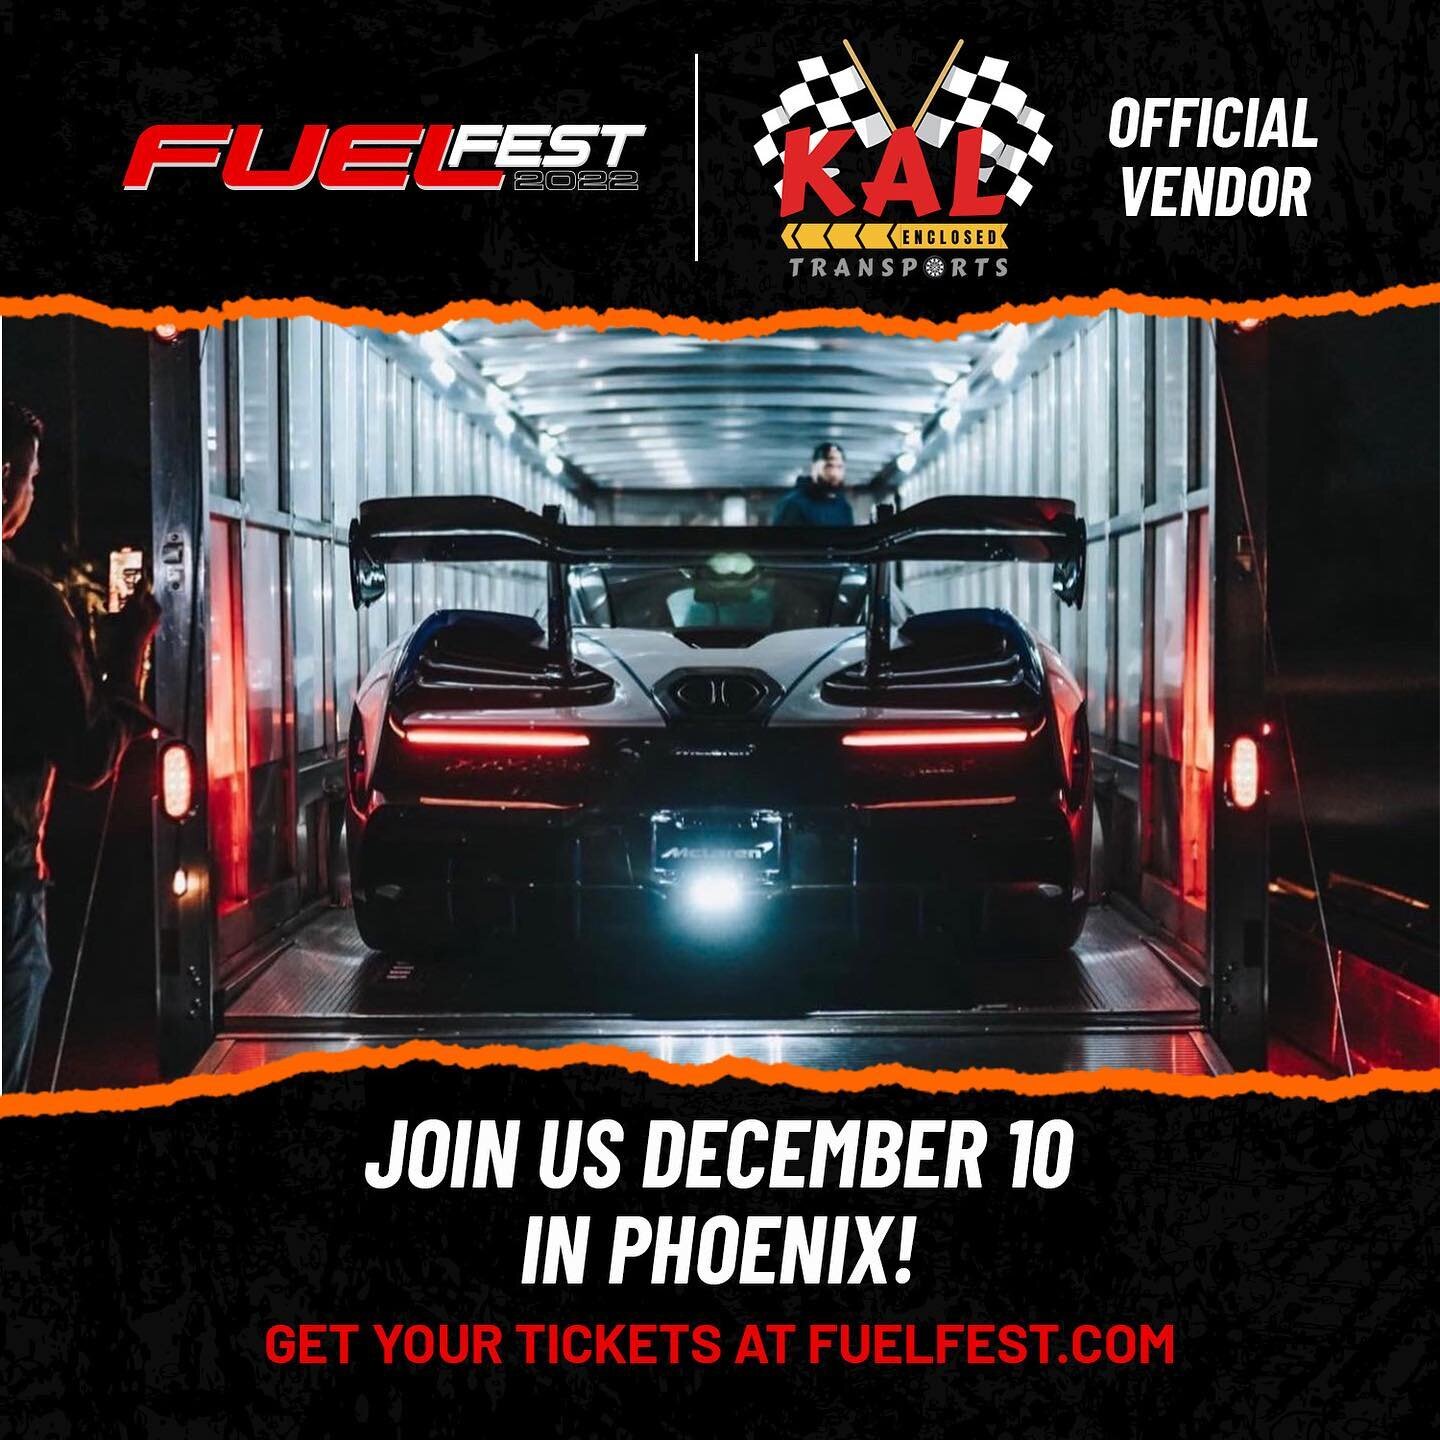 🏁❗️LAST STOP❗️🏁 We&rsquo;re super excited to be apart of #FuelFest2022 . This weekend at the wild horse #FuelFest makes it&rsquo;s last stop in PHX, we&rsquo;re looking forward to seeing everybody. Stop by and let&rsquo;s talk about your next trans